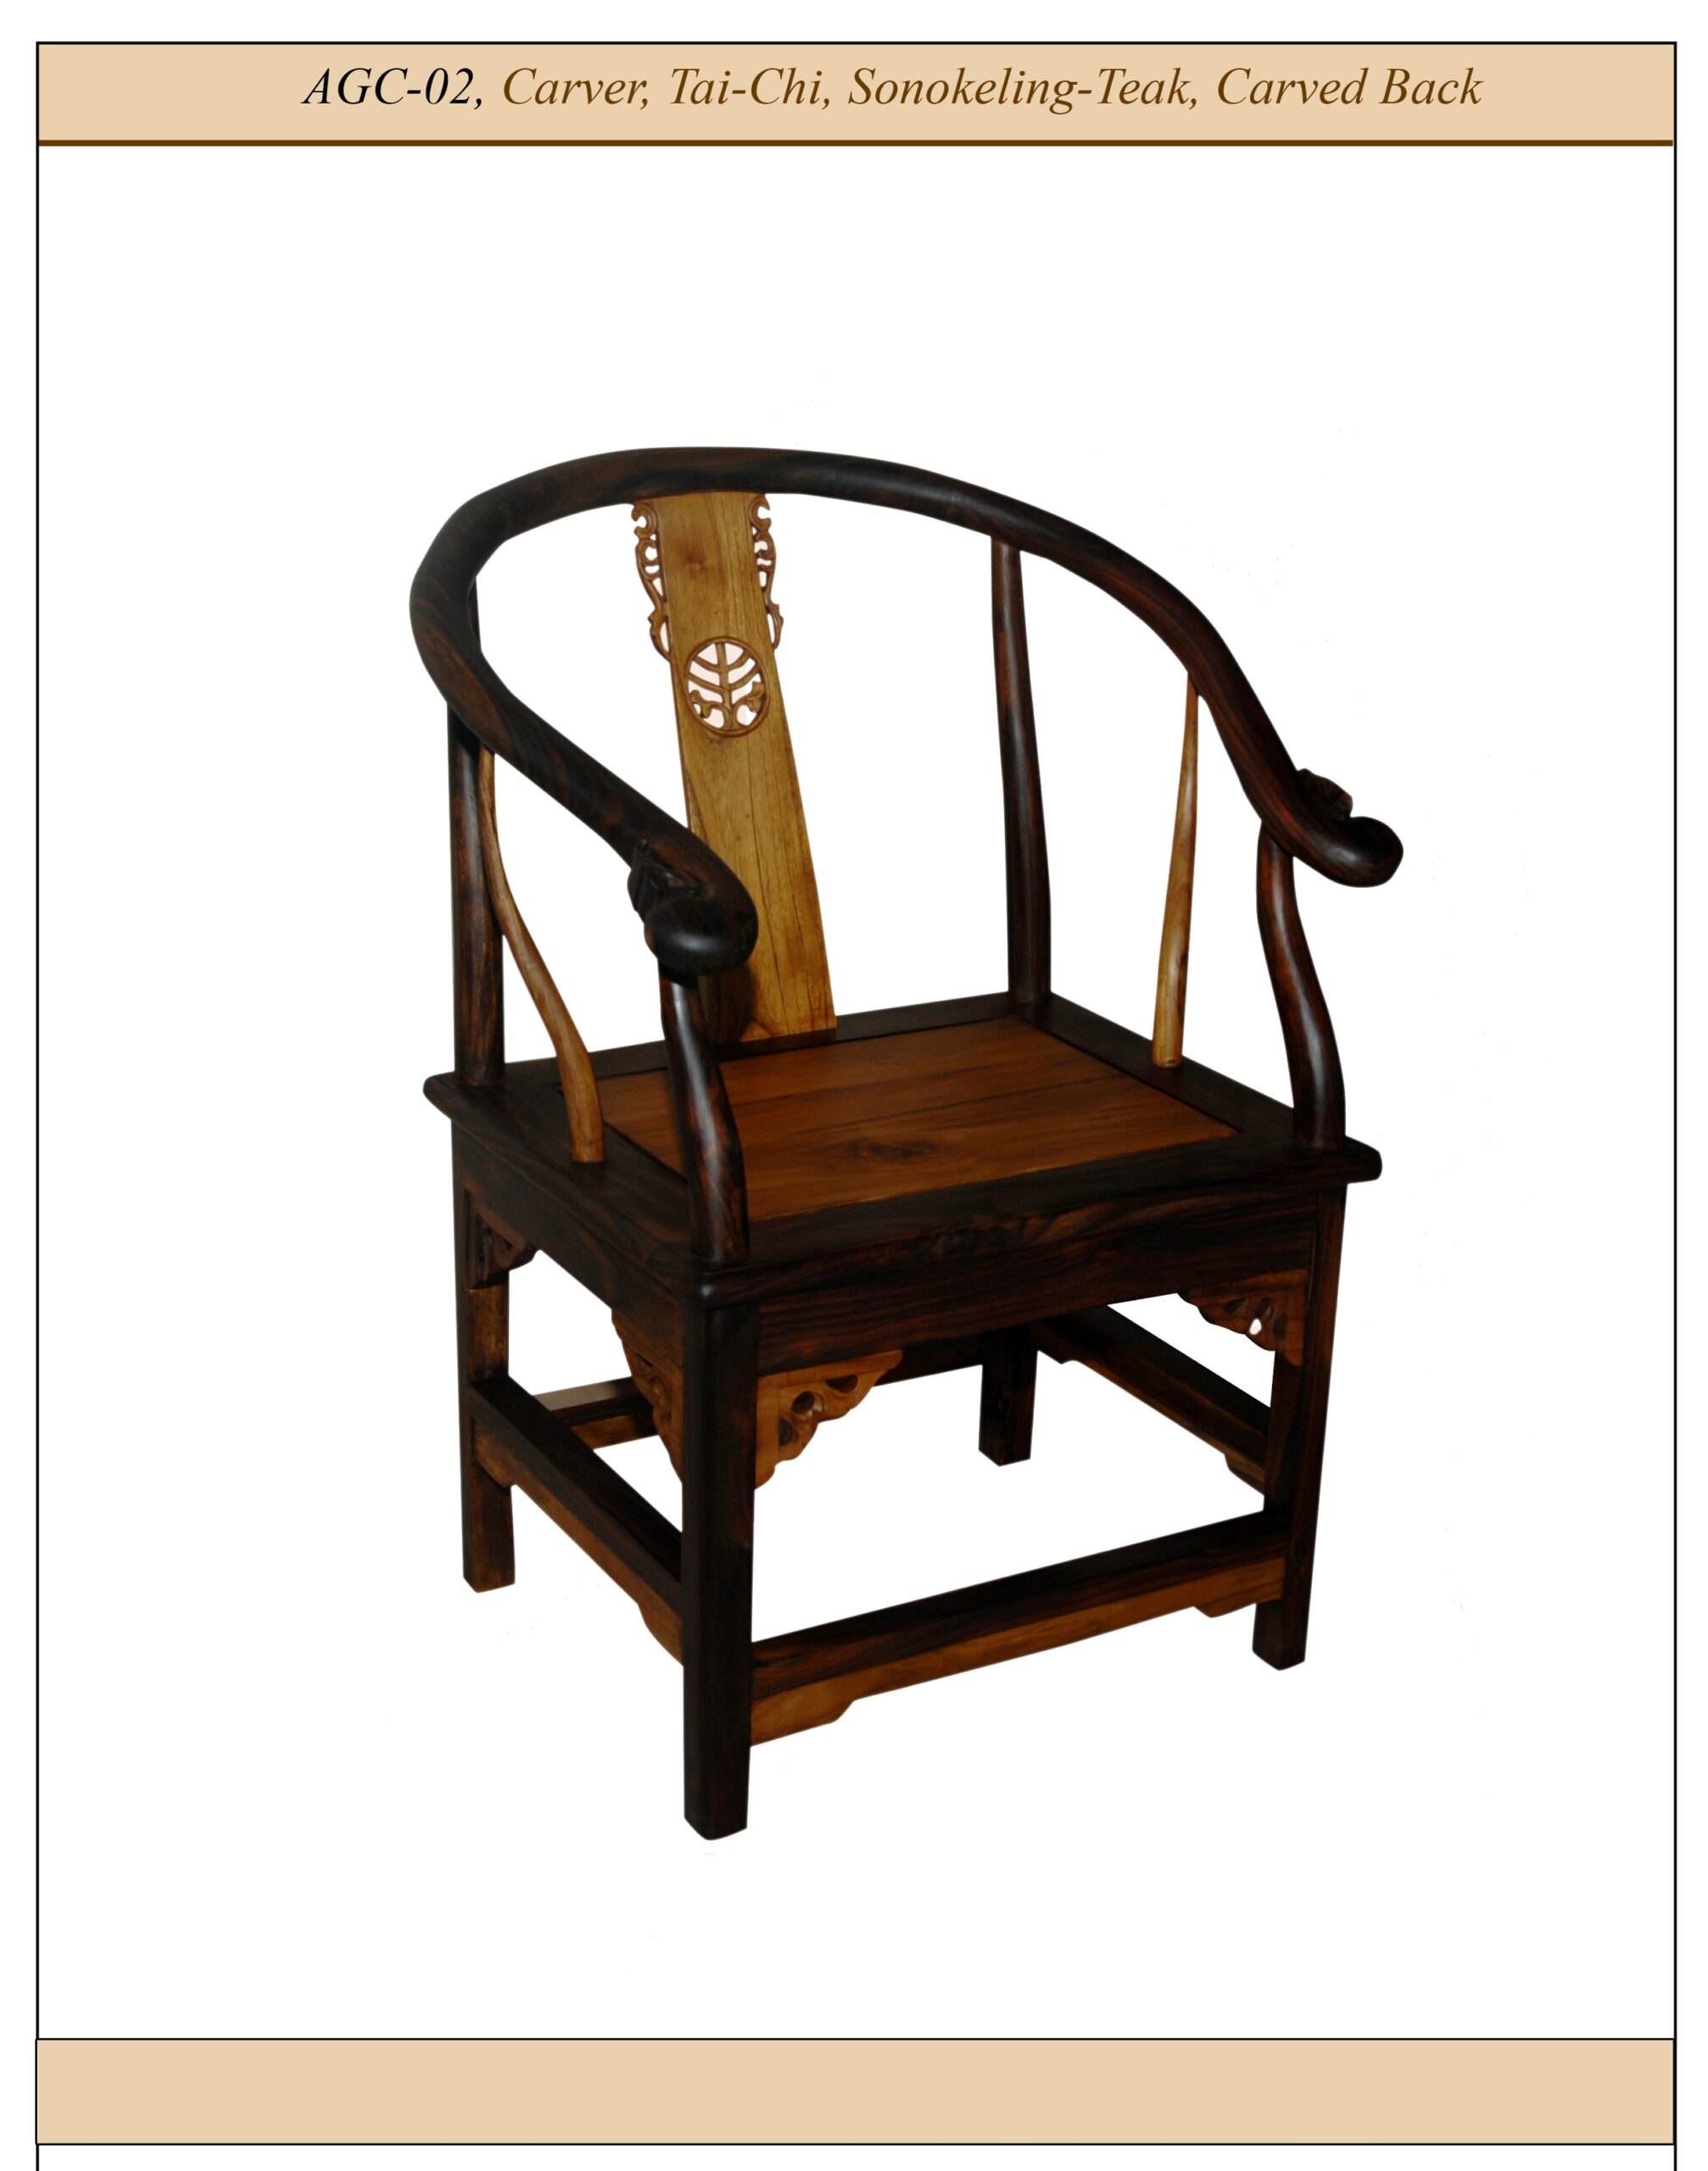  Tai Chi Carver Chair, Sonokeling and Teak, Carved back